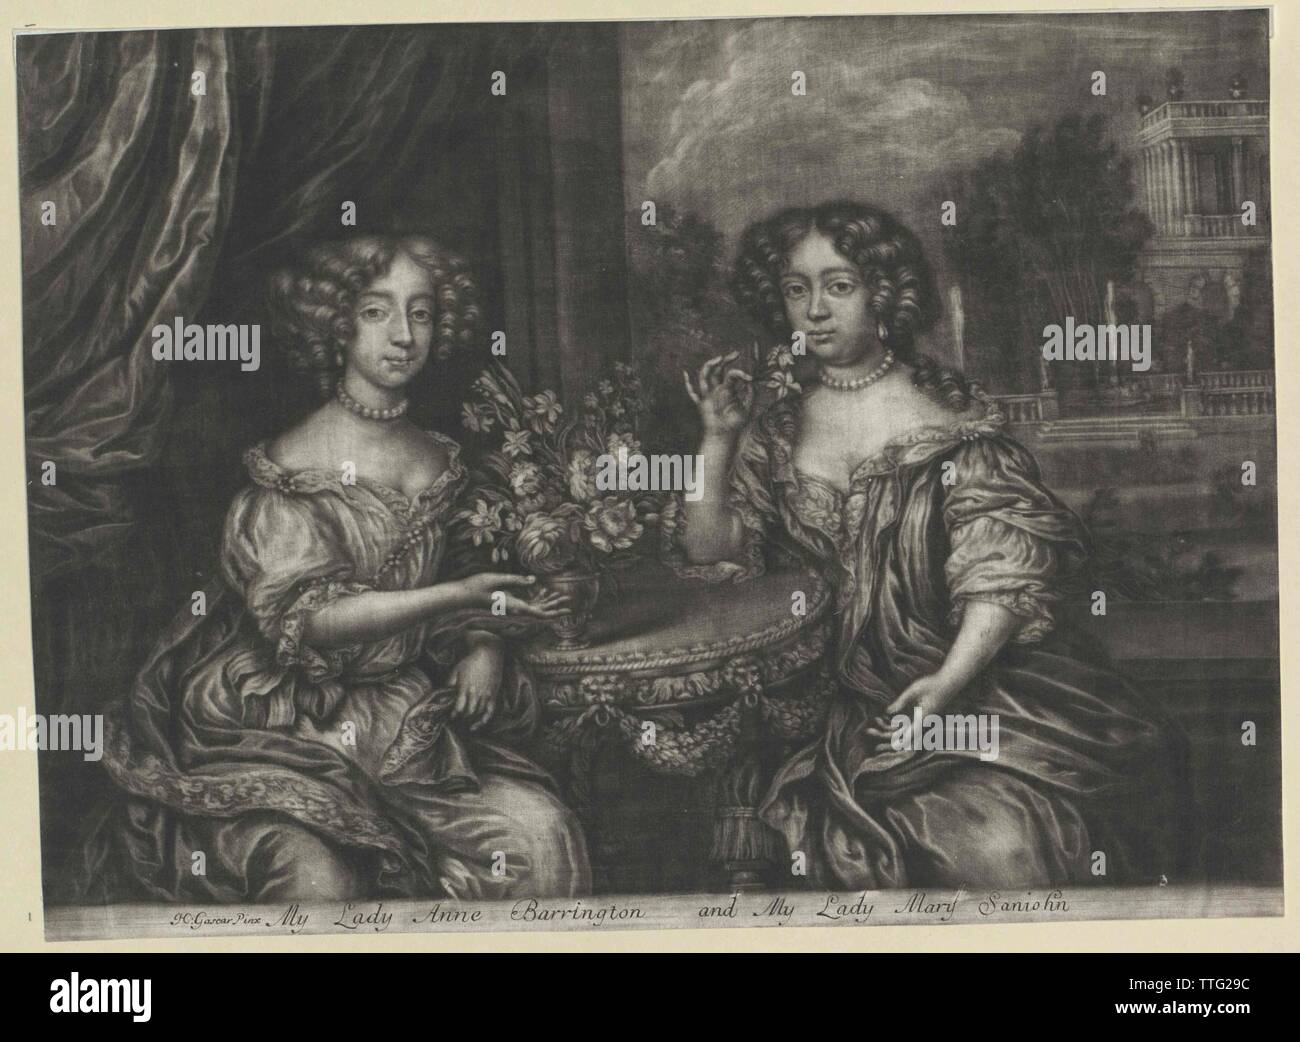 Barrington, Anne lady, vissuto circa 1650, Additional-Rights-Clearance-Info-Not-Available Foto Stock